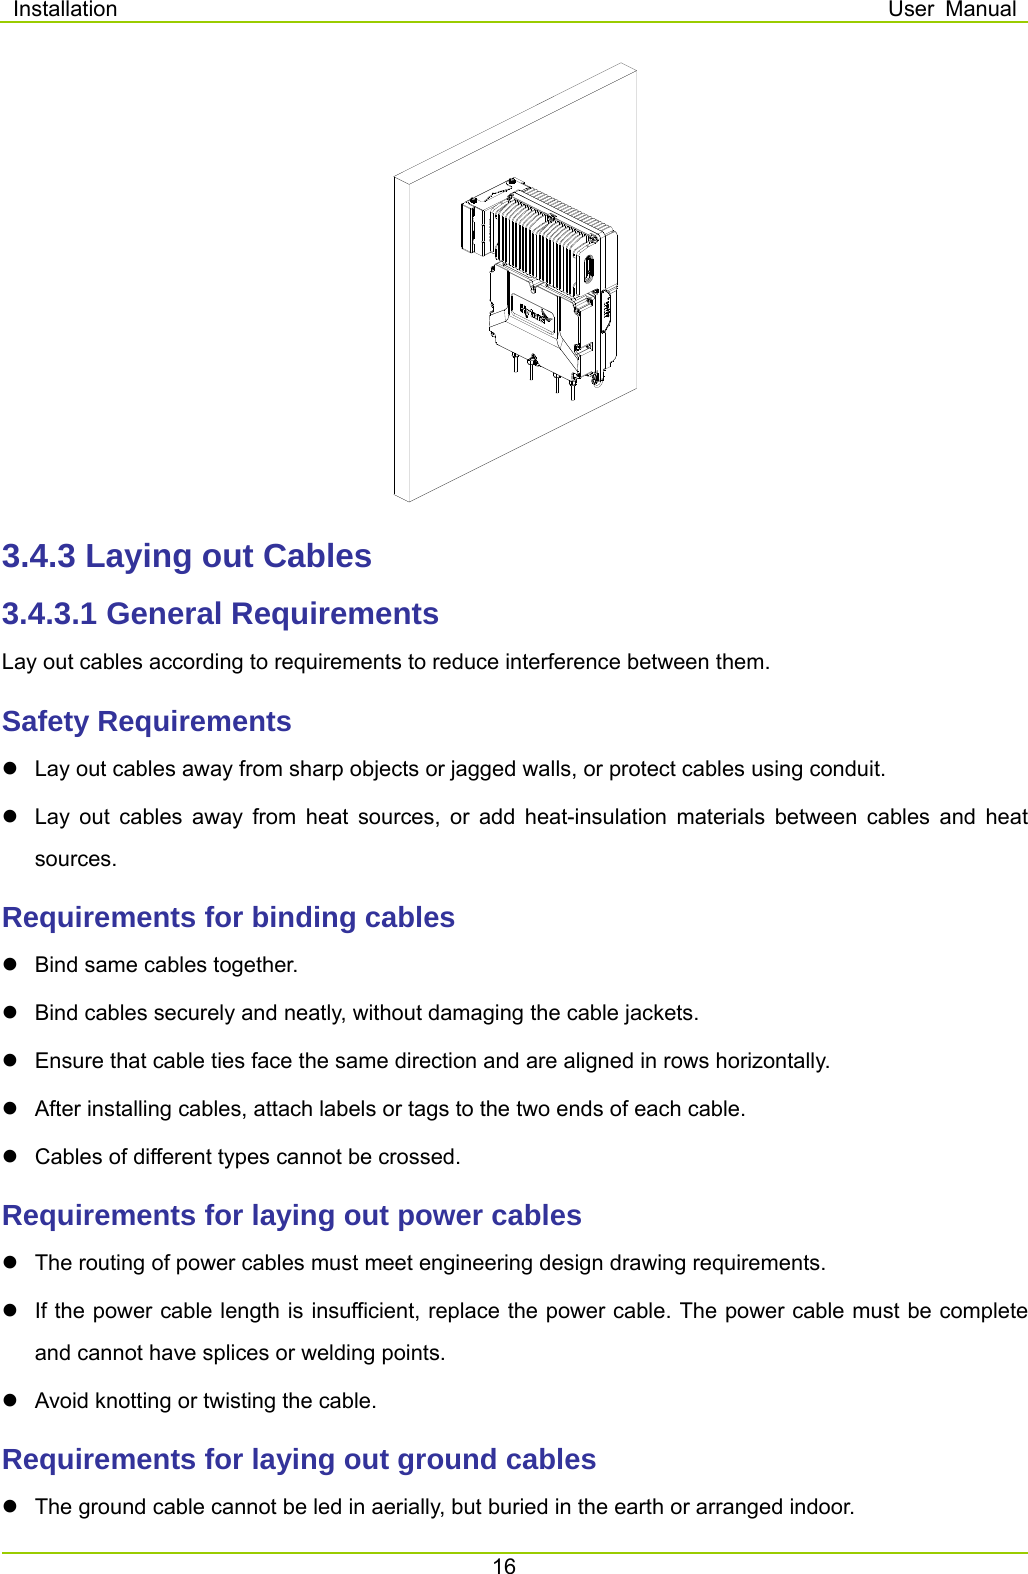 Installation  User Manual 16   3.4.3 Laying out Cables 3.4.3.1 General Requirements Lay out cables according to requirements to reduce interference between them.   Safety Requirements   Lay out cables away from sharp objects or jagged walls, or protect cables using conduit.   Lay out cables away from heat sources, or add heat-insulation materials between cables and heat sources. Requirements for binding cables   Bind same cables together.   Bind cables securely and neatly, without damaging the cable jackets.   Ensure that cable ties face the same direction and are aligned in rows horizontally.   After installing cables, attach labels or tags to the two ends of each cable.   Cables of different types cannot be crossed. Requirements for laying out power cables   The routing of power cables must meet engineering design drawing requirements.     If the power cable length is insufficient, replace the power cable. The power cable must be complete and cannot have splices or welding points.     Avoid knotting or twisting the cable.   Requirements for laying out ground cables   The ground cable cannot be led in aerially, but buried in the earth or arranged indoor. 